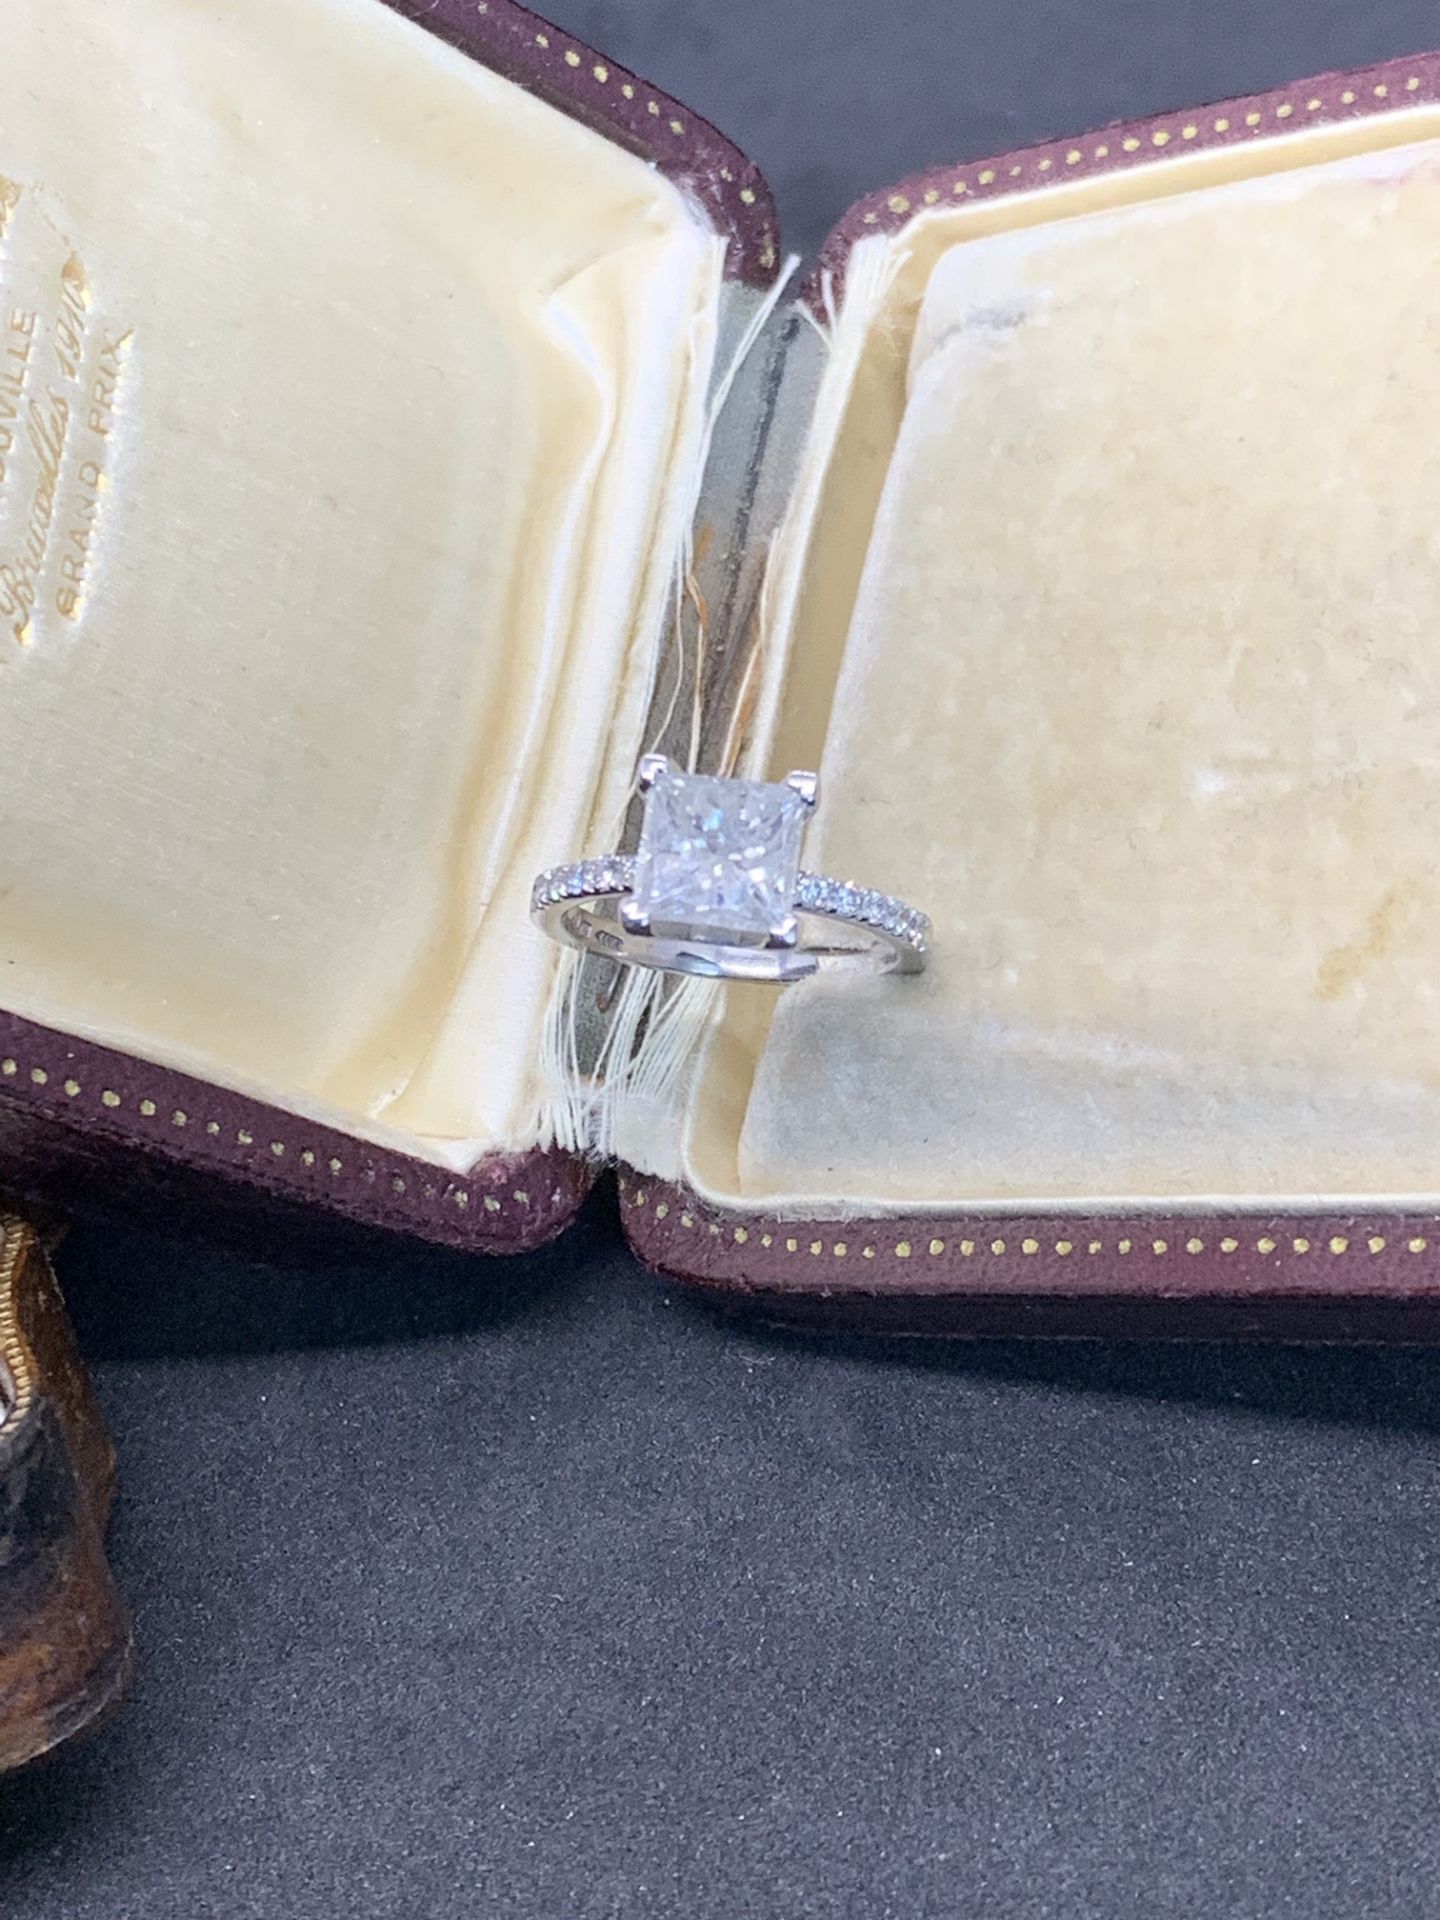 2.82ct PRINCESS CUT DIAMOND SOLITAIRE RING SET IN WHITE METAL TESTED AS WHITE GOLD - Image 4 of 4